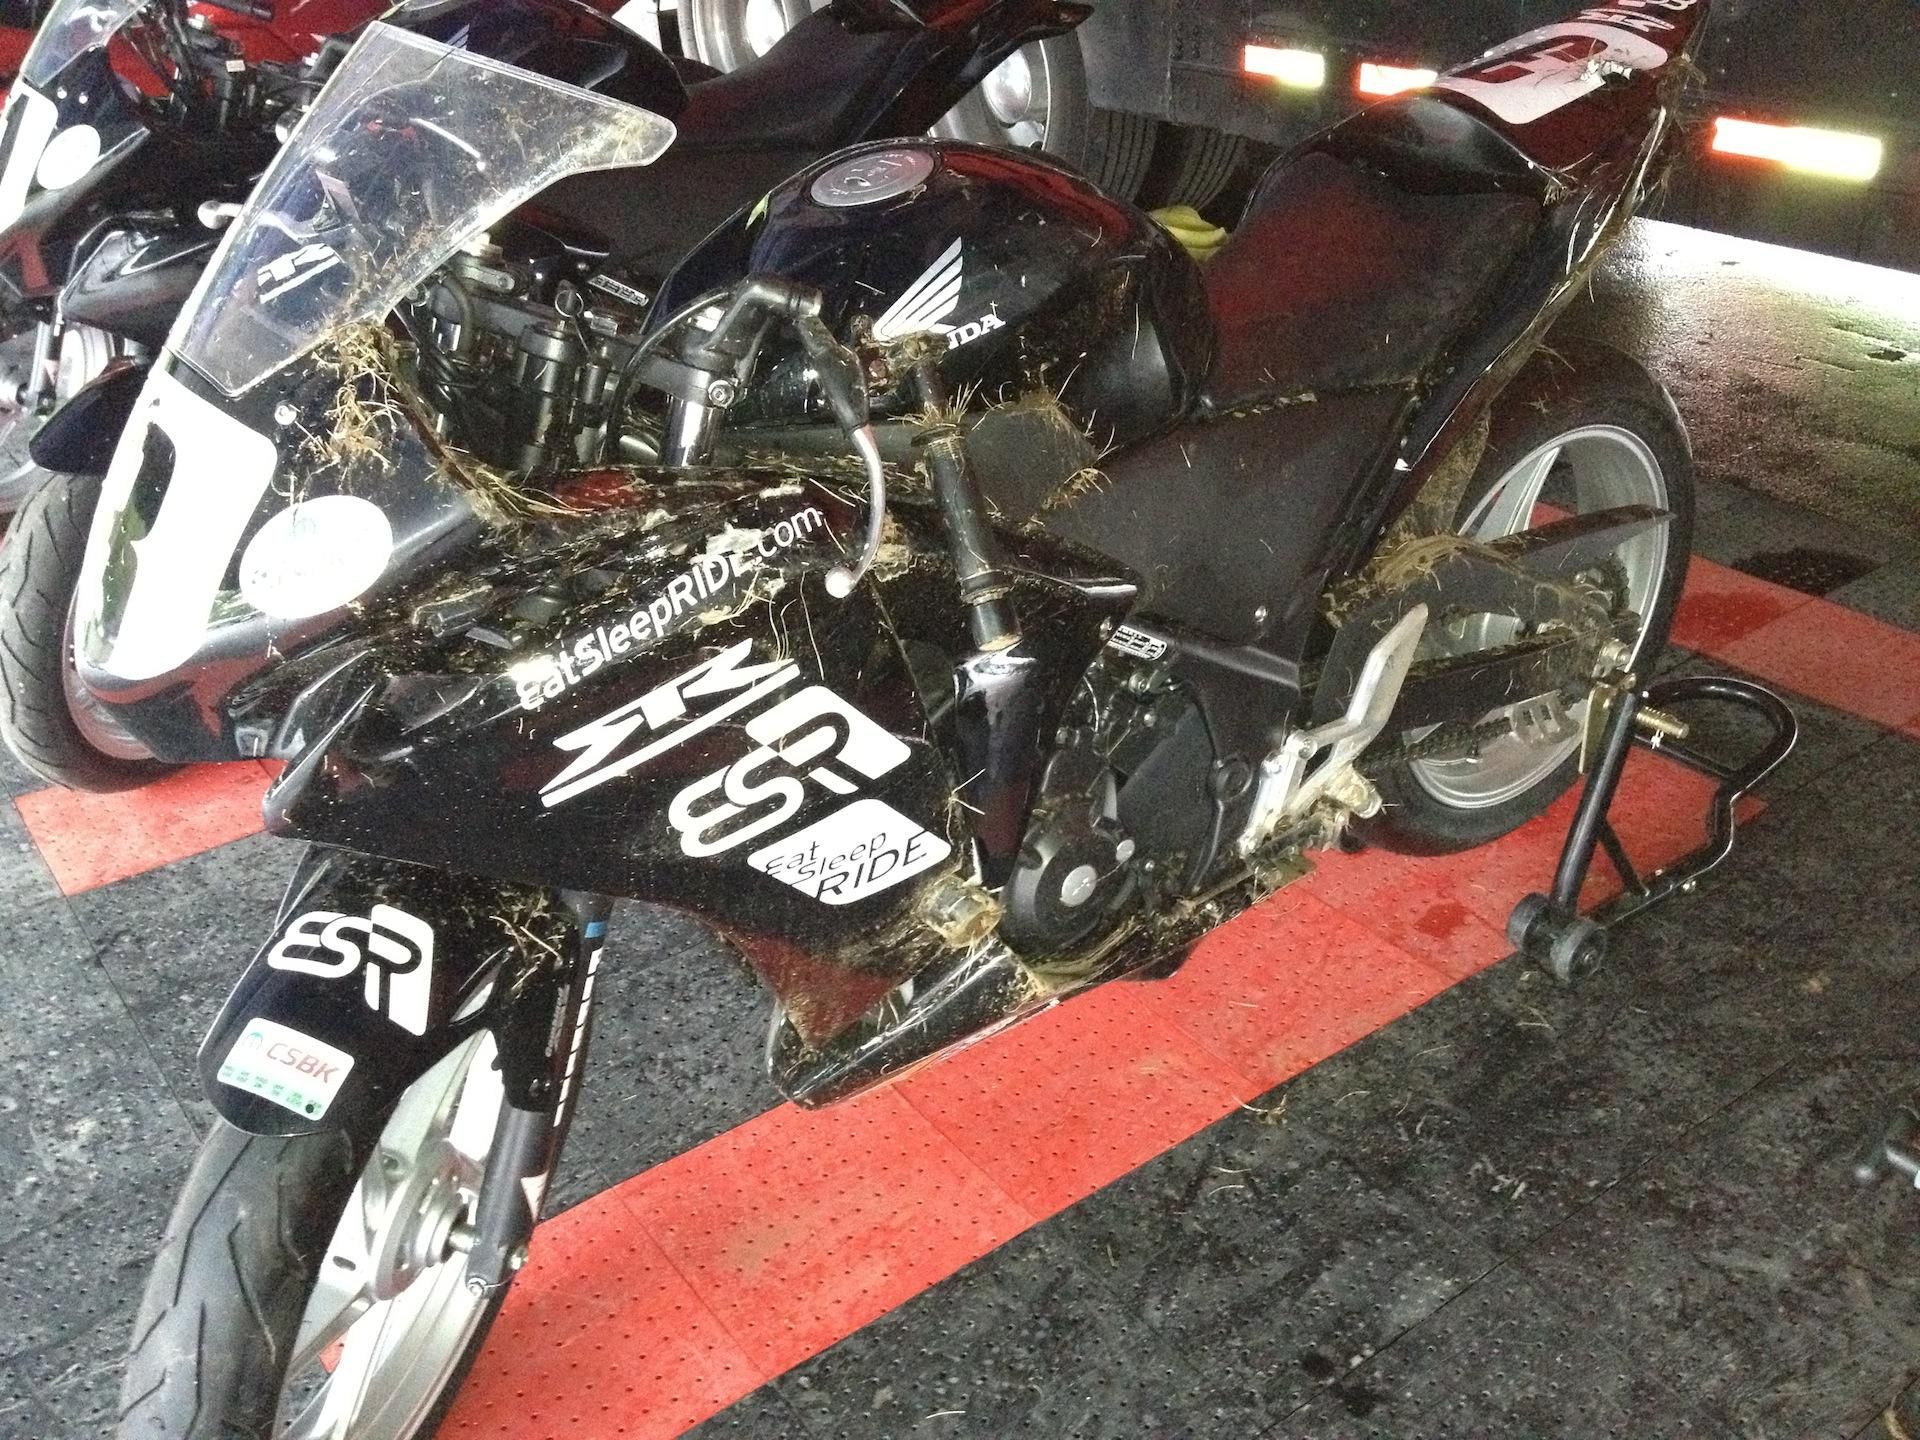 My CBR250 after lowside at turn 15 - Mont Tremblant